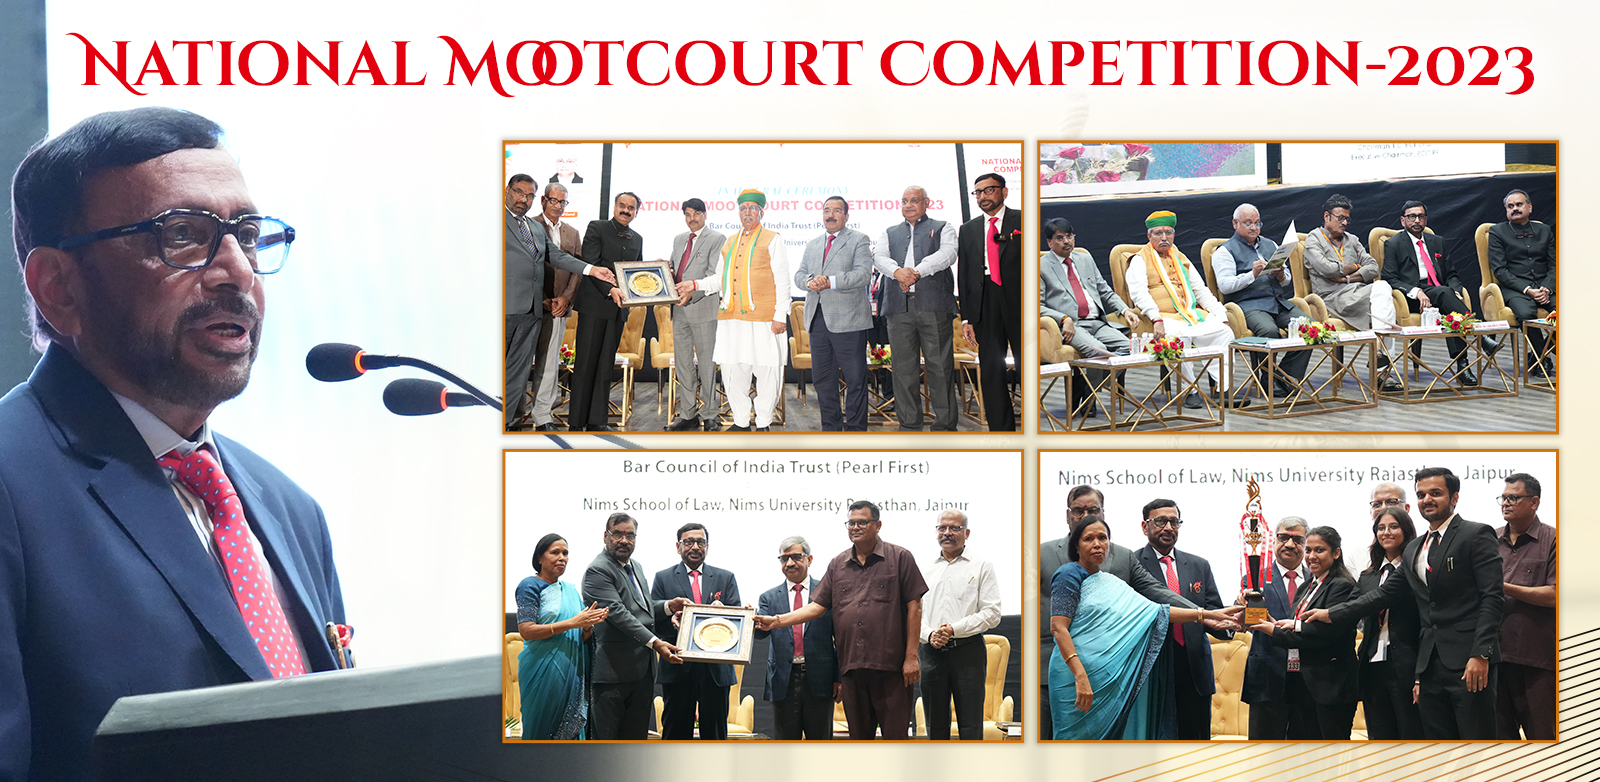 National Moot Court Competition Hosted at NIMS University Rajasthan in association with the Bar Council of India Trust (Pearl first)